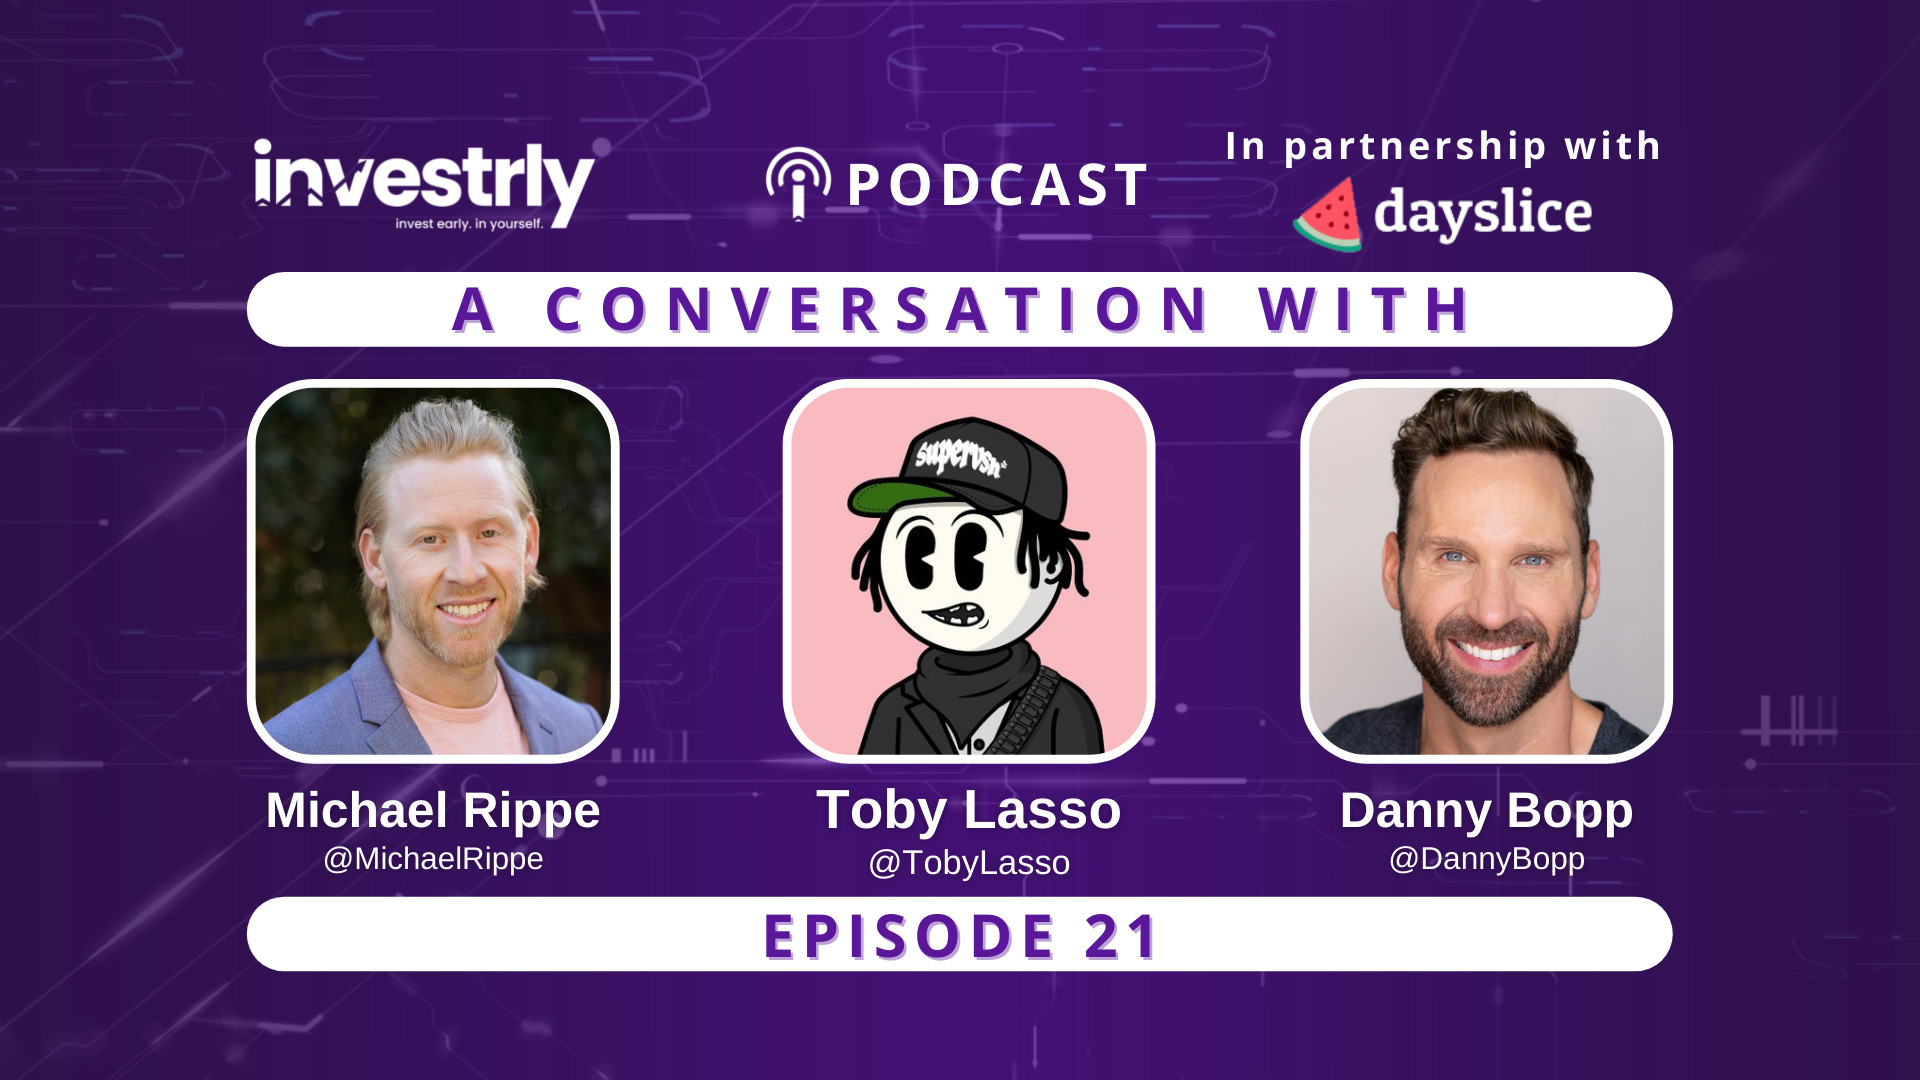 🎧 Ep 21: A Conversation With Toby Lasso